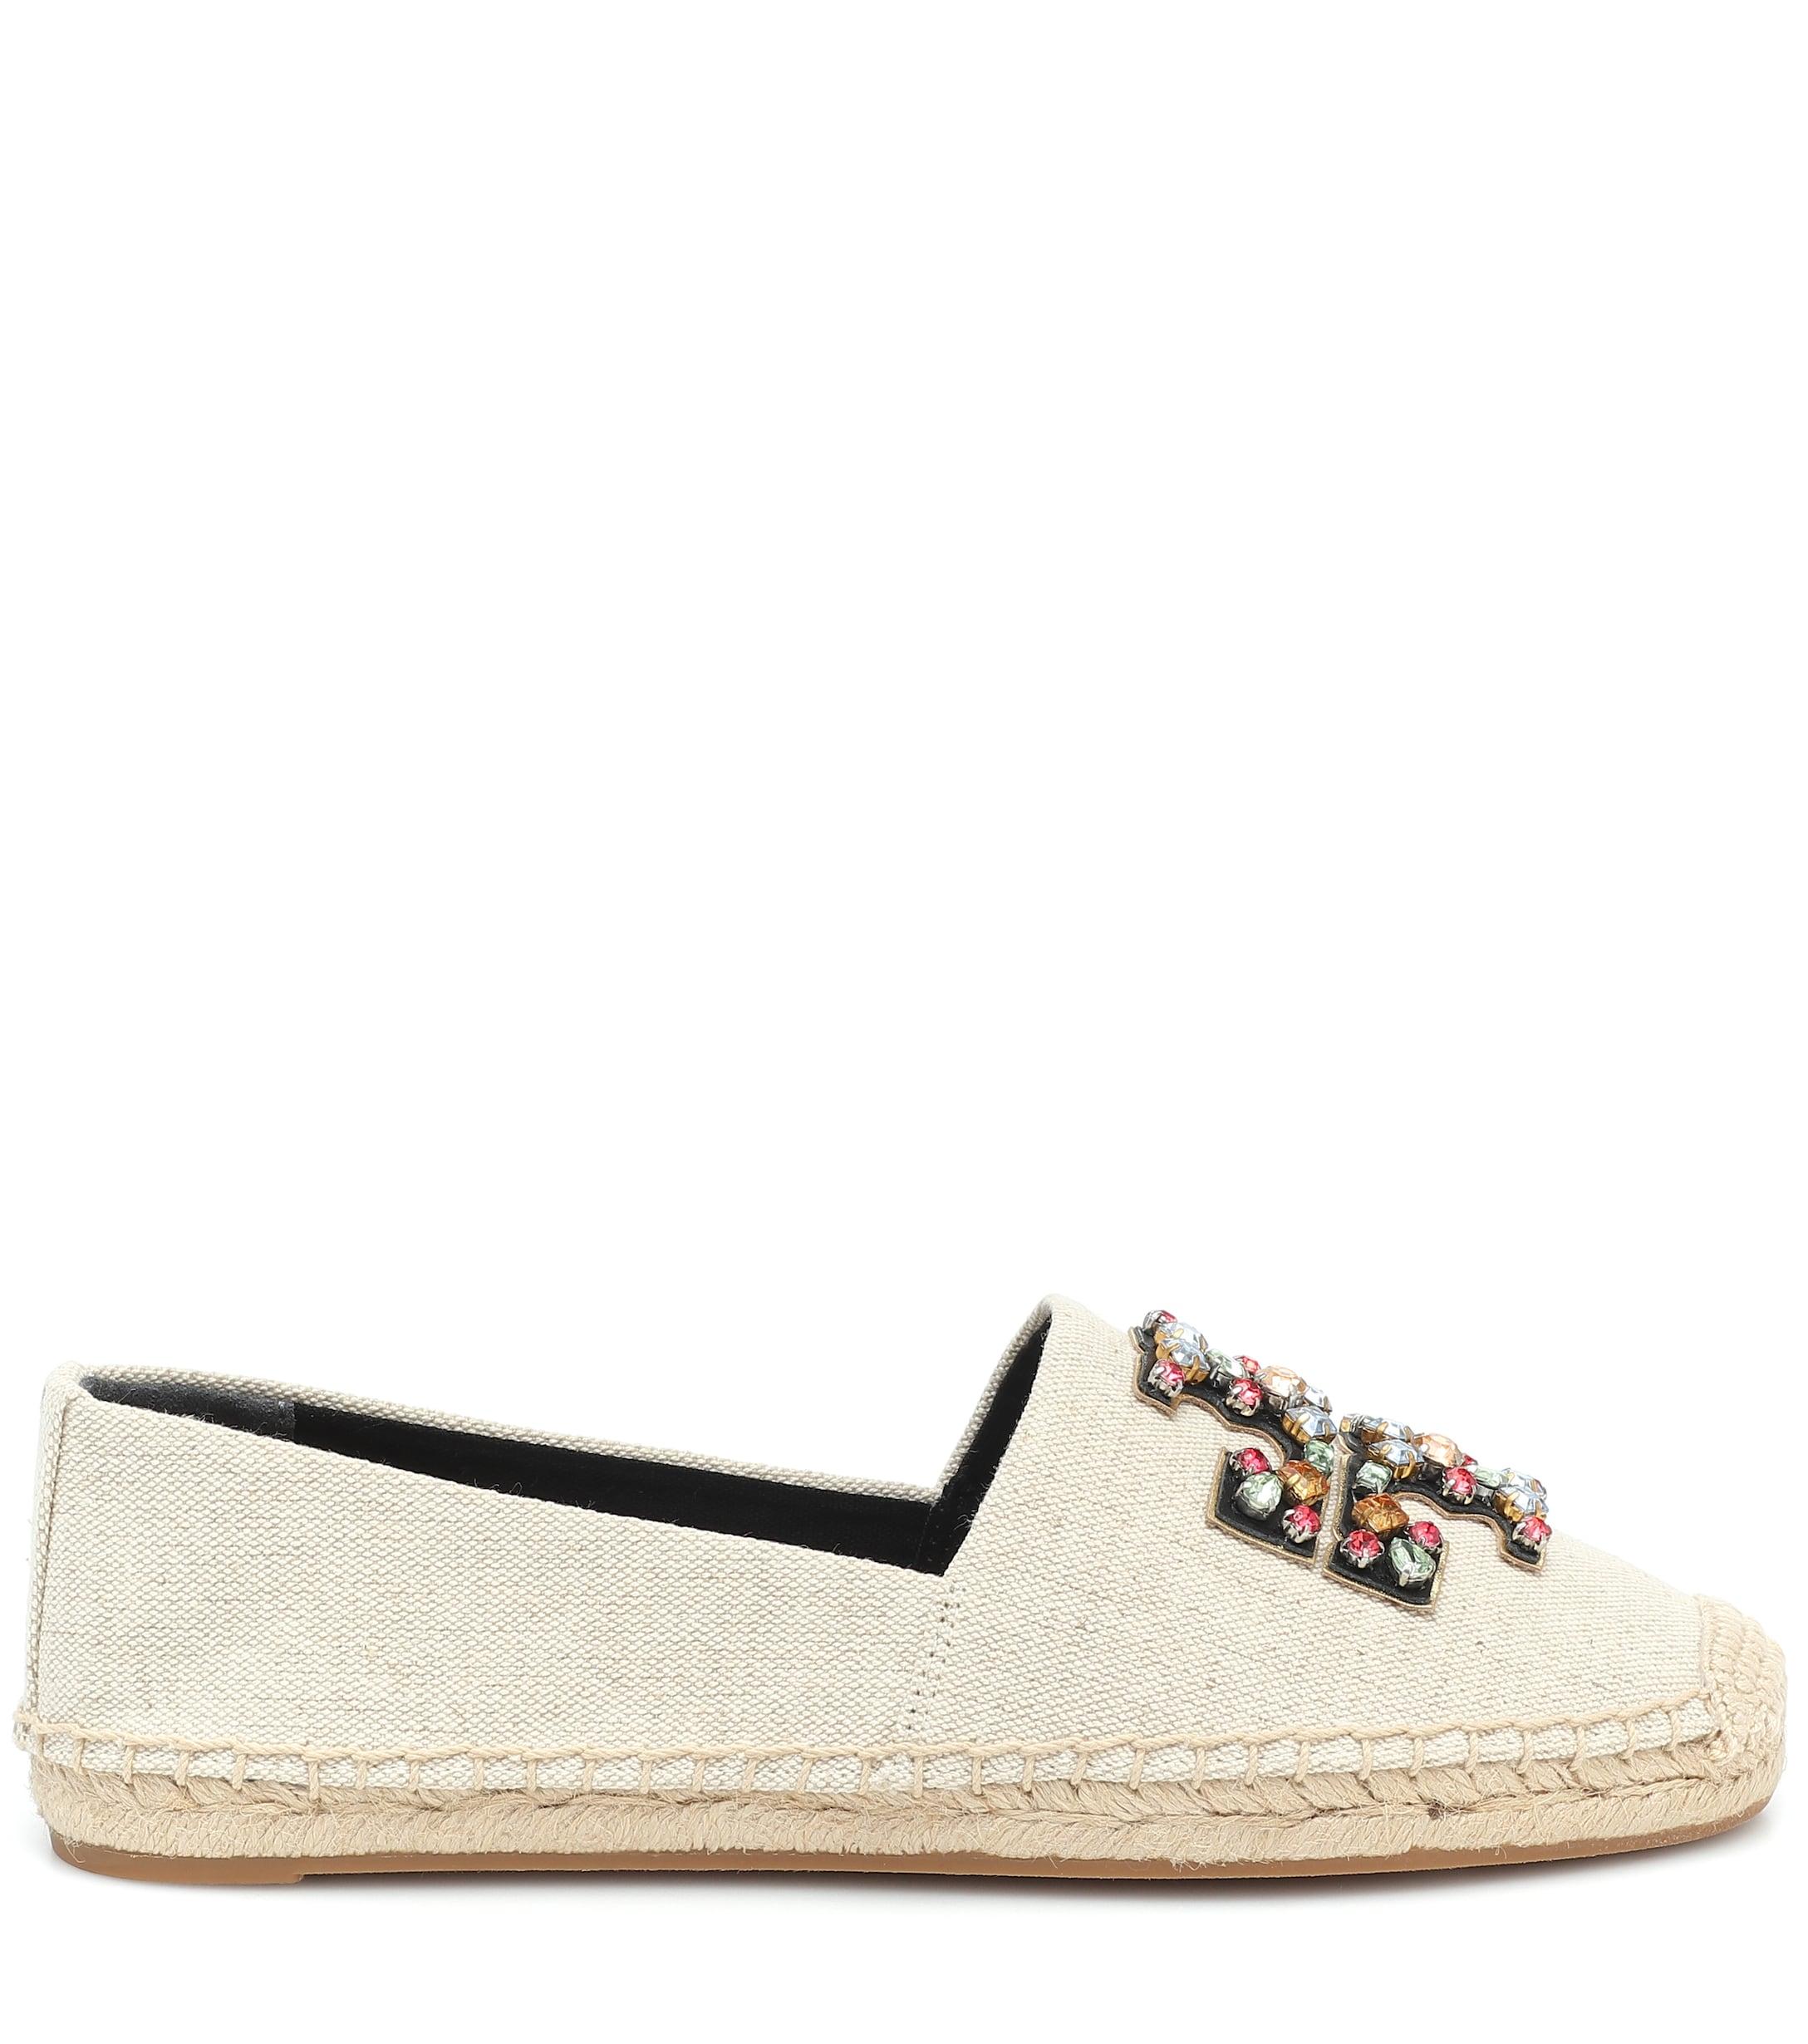 Tory Burch Canvas Ines Embellished Espadrilles - Lyst